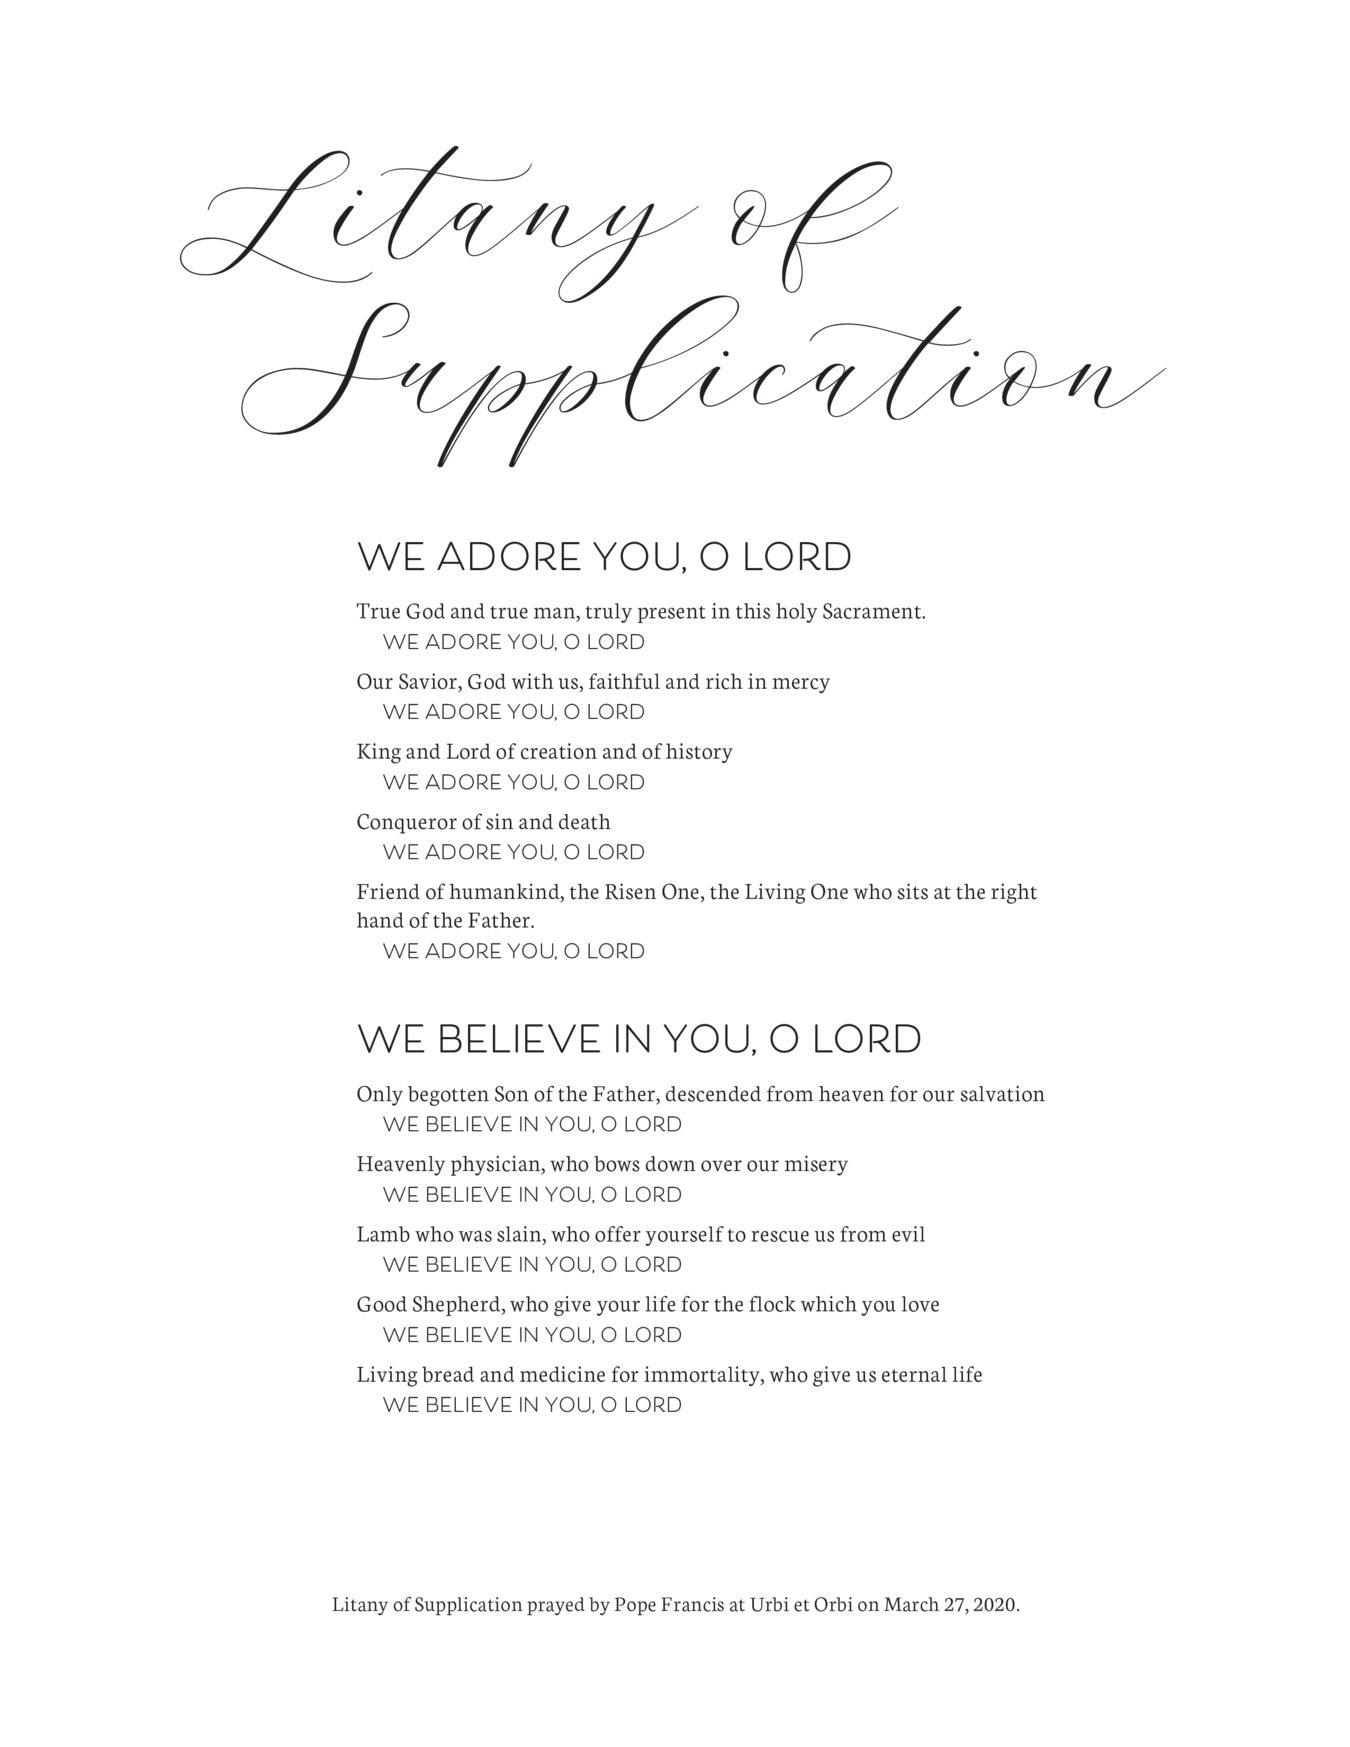 Litany of Supplication